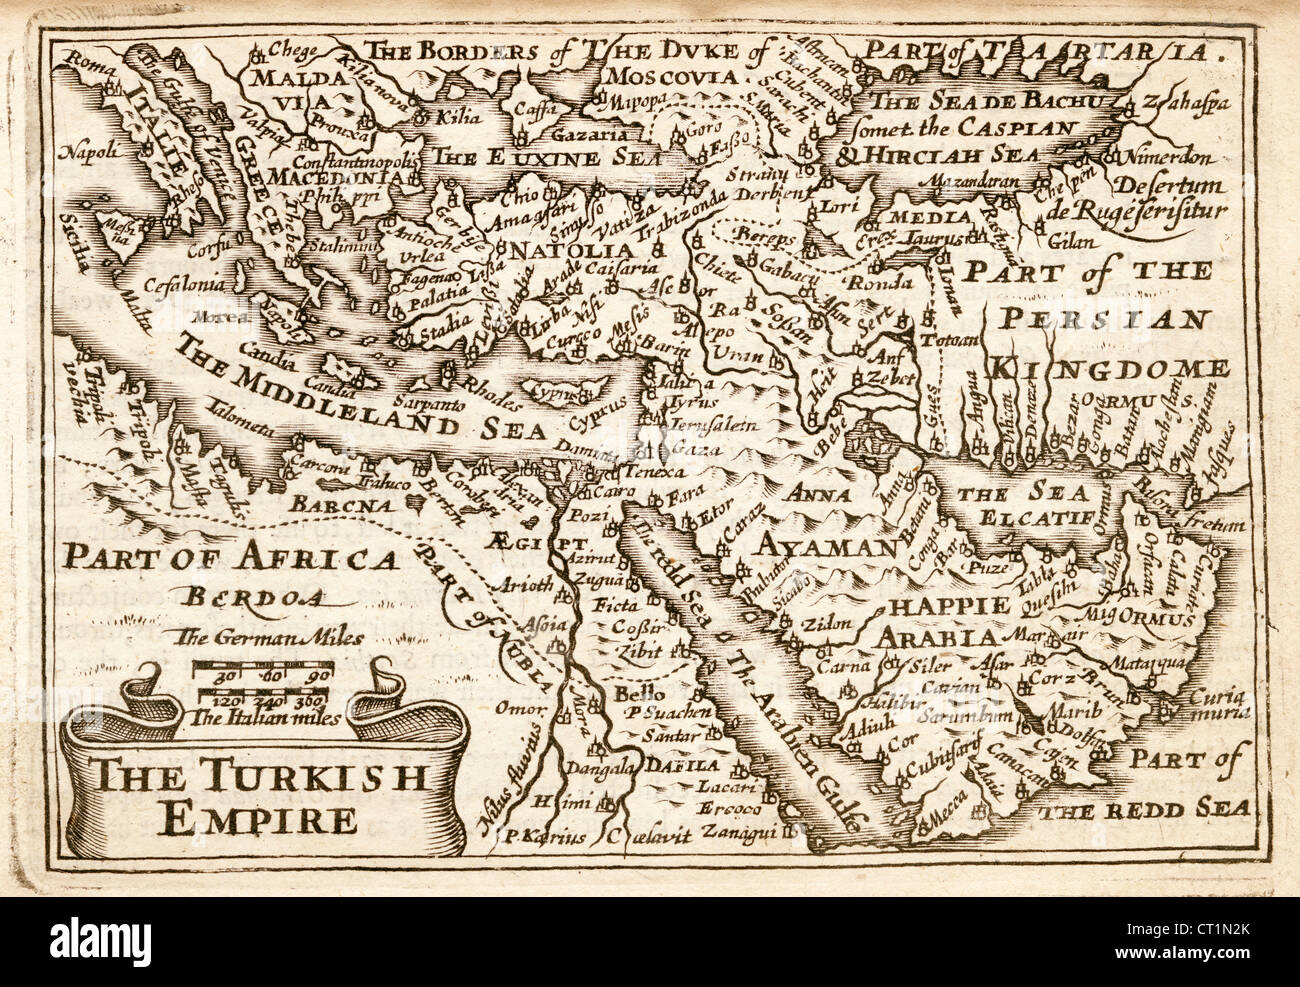 Map of The Turkish Empire by Petrus Kaerius 1646 from John Speed Prospect of the most Famous Parts of the World 1675 JMH6026 Stock Photo